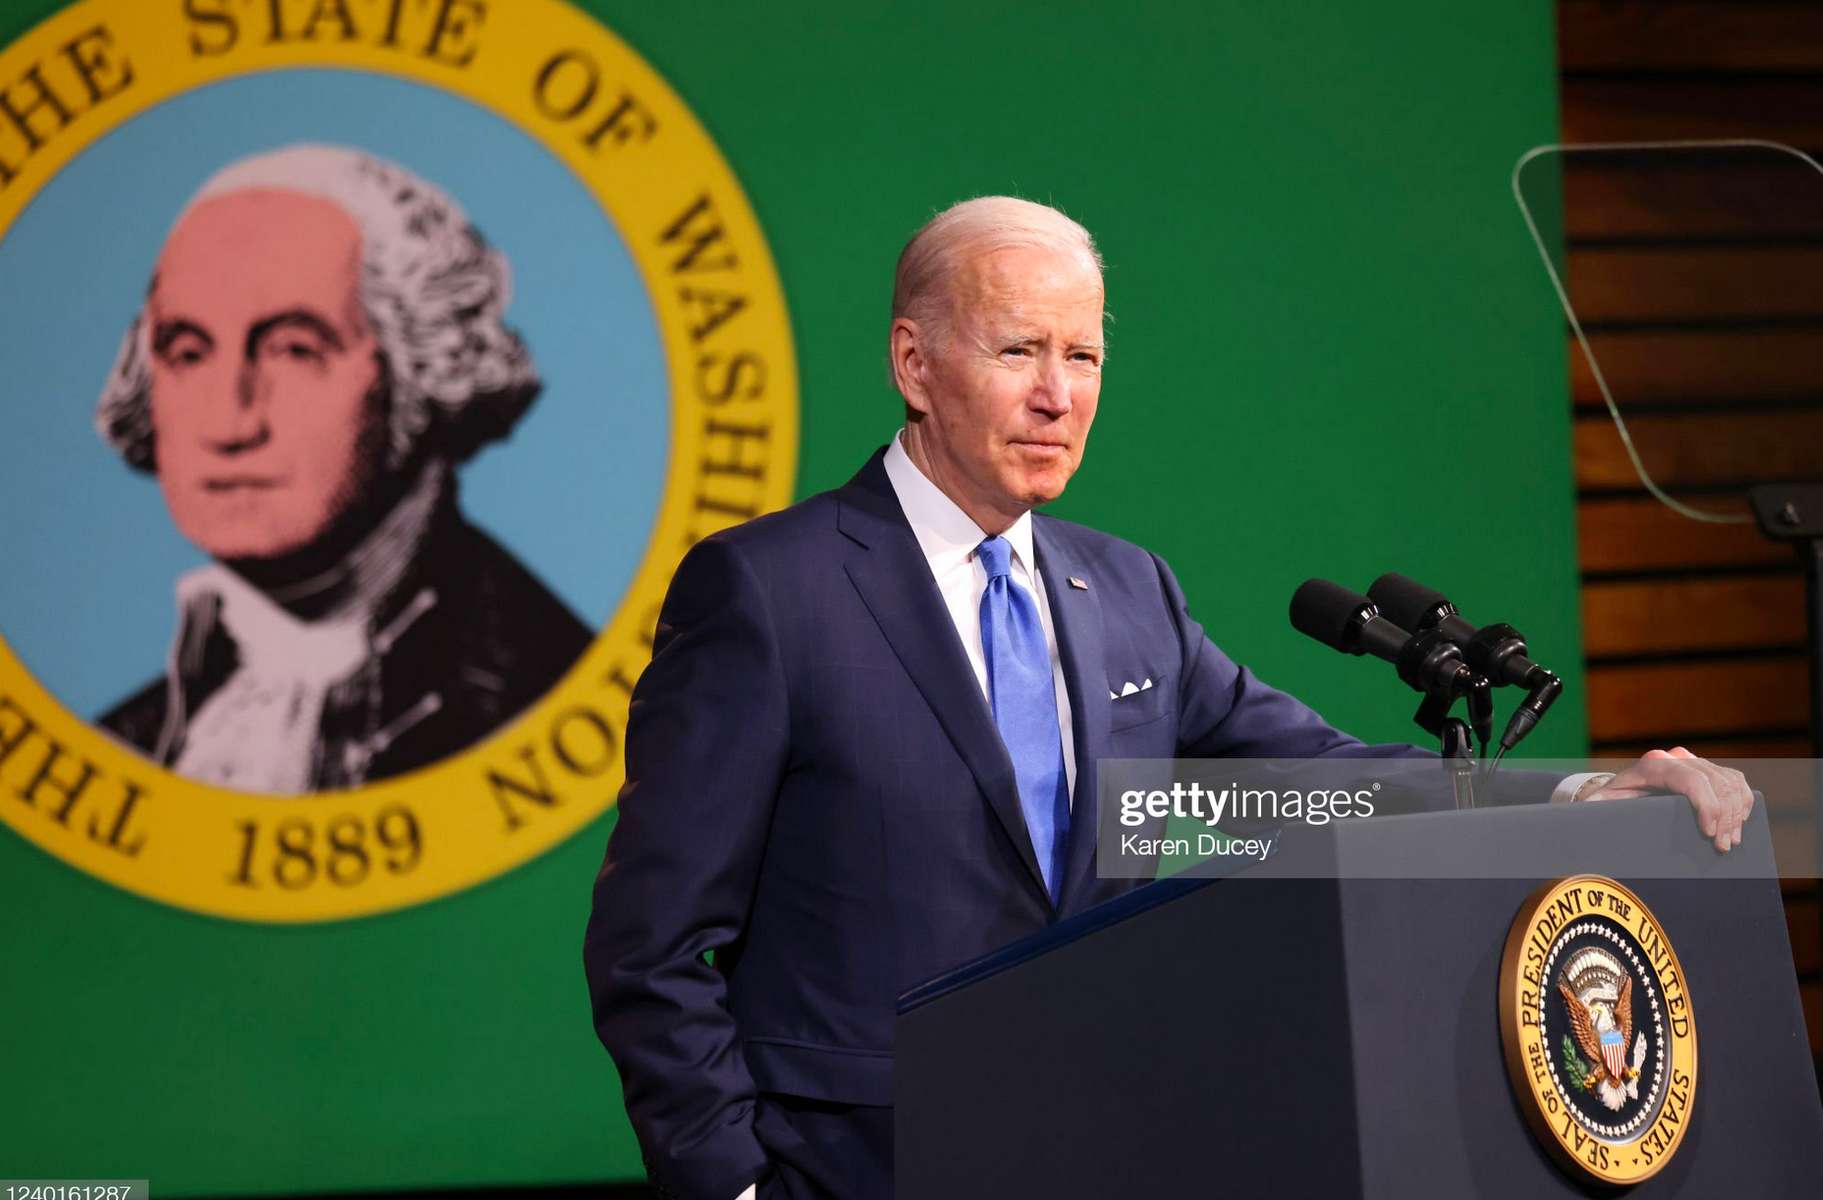 President Biden Speaks At Green River College Outside Of Seattle, for Getty Images, January 22, 2022.